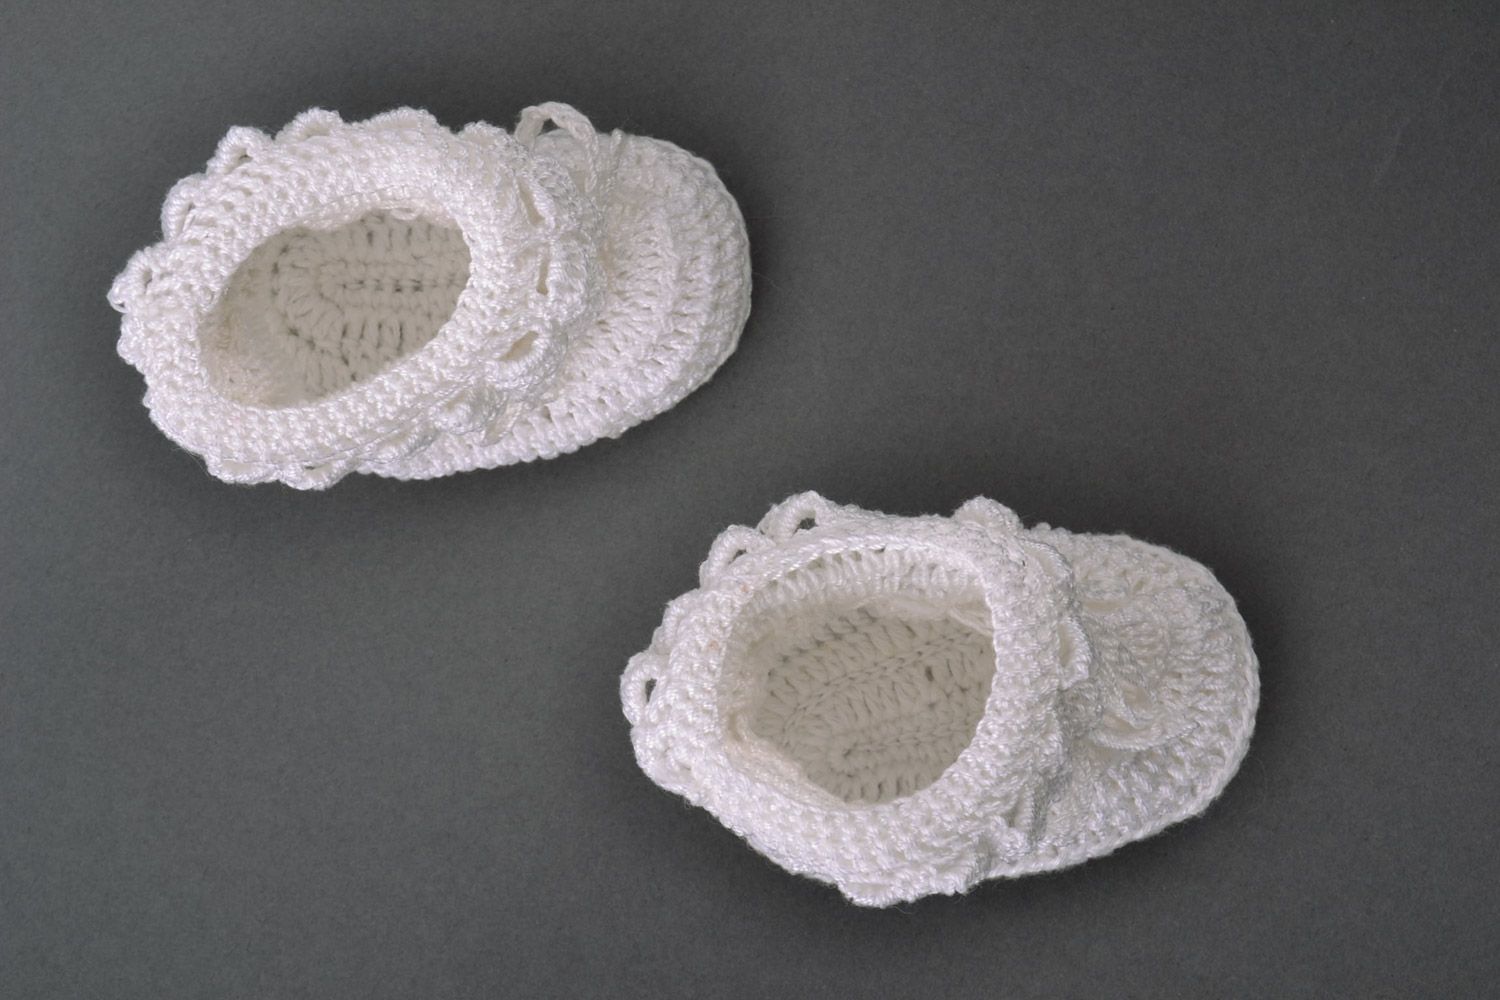 White handmade baby booties knitted of wool and cotton in the shape of shoes photo 2